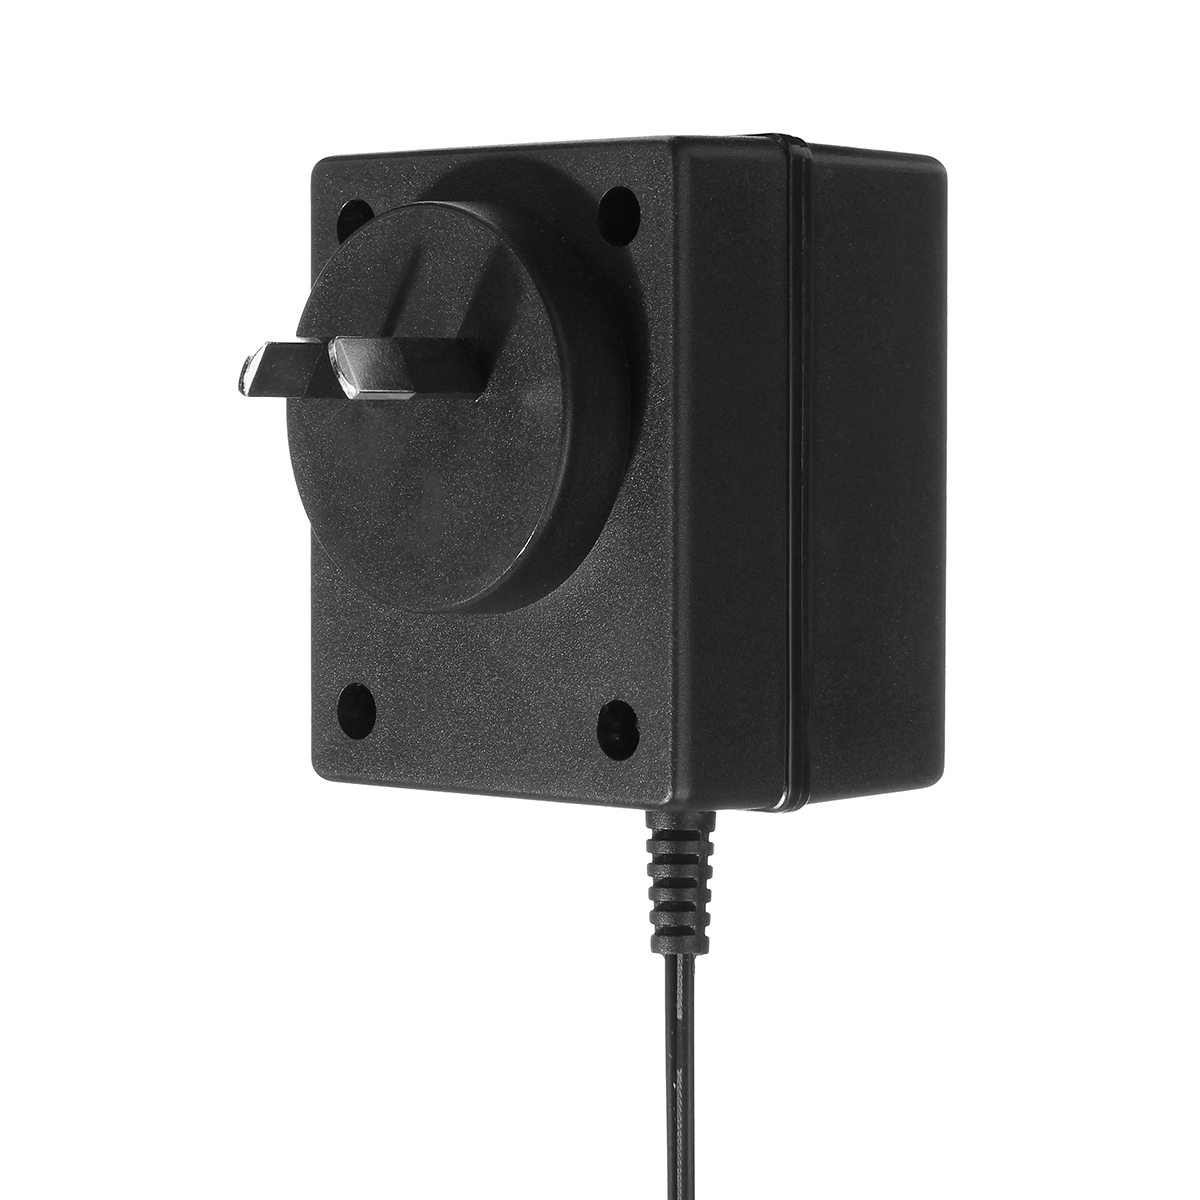 7m-Cable-AU-Plug-Adapter-for-Rring-Video-Doorbell-230V-to-18V-500ma-1587262-4